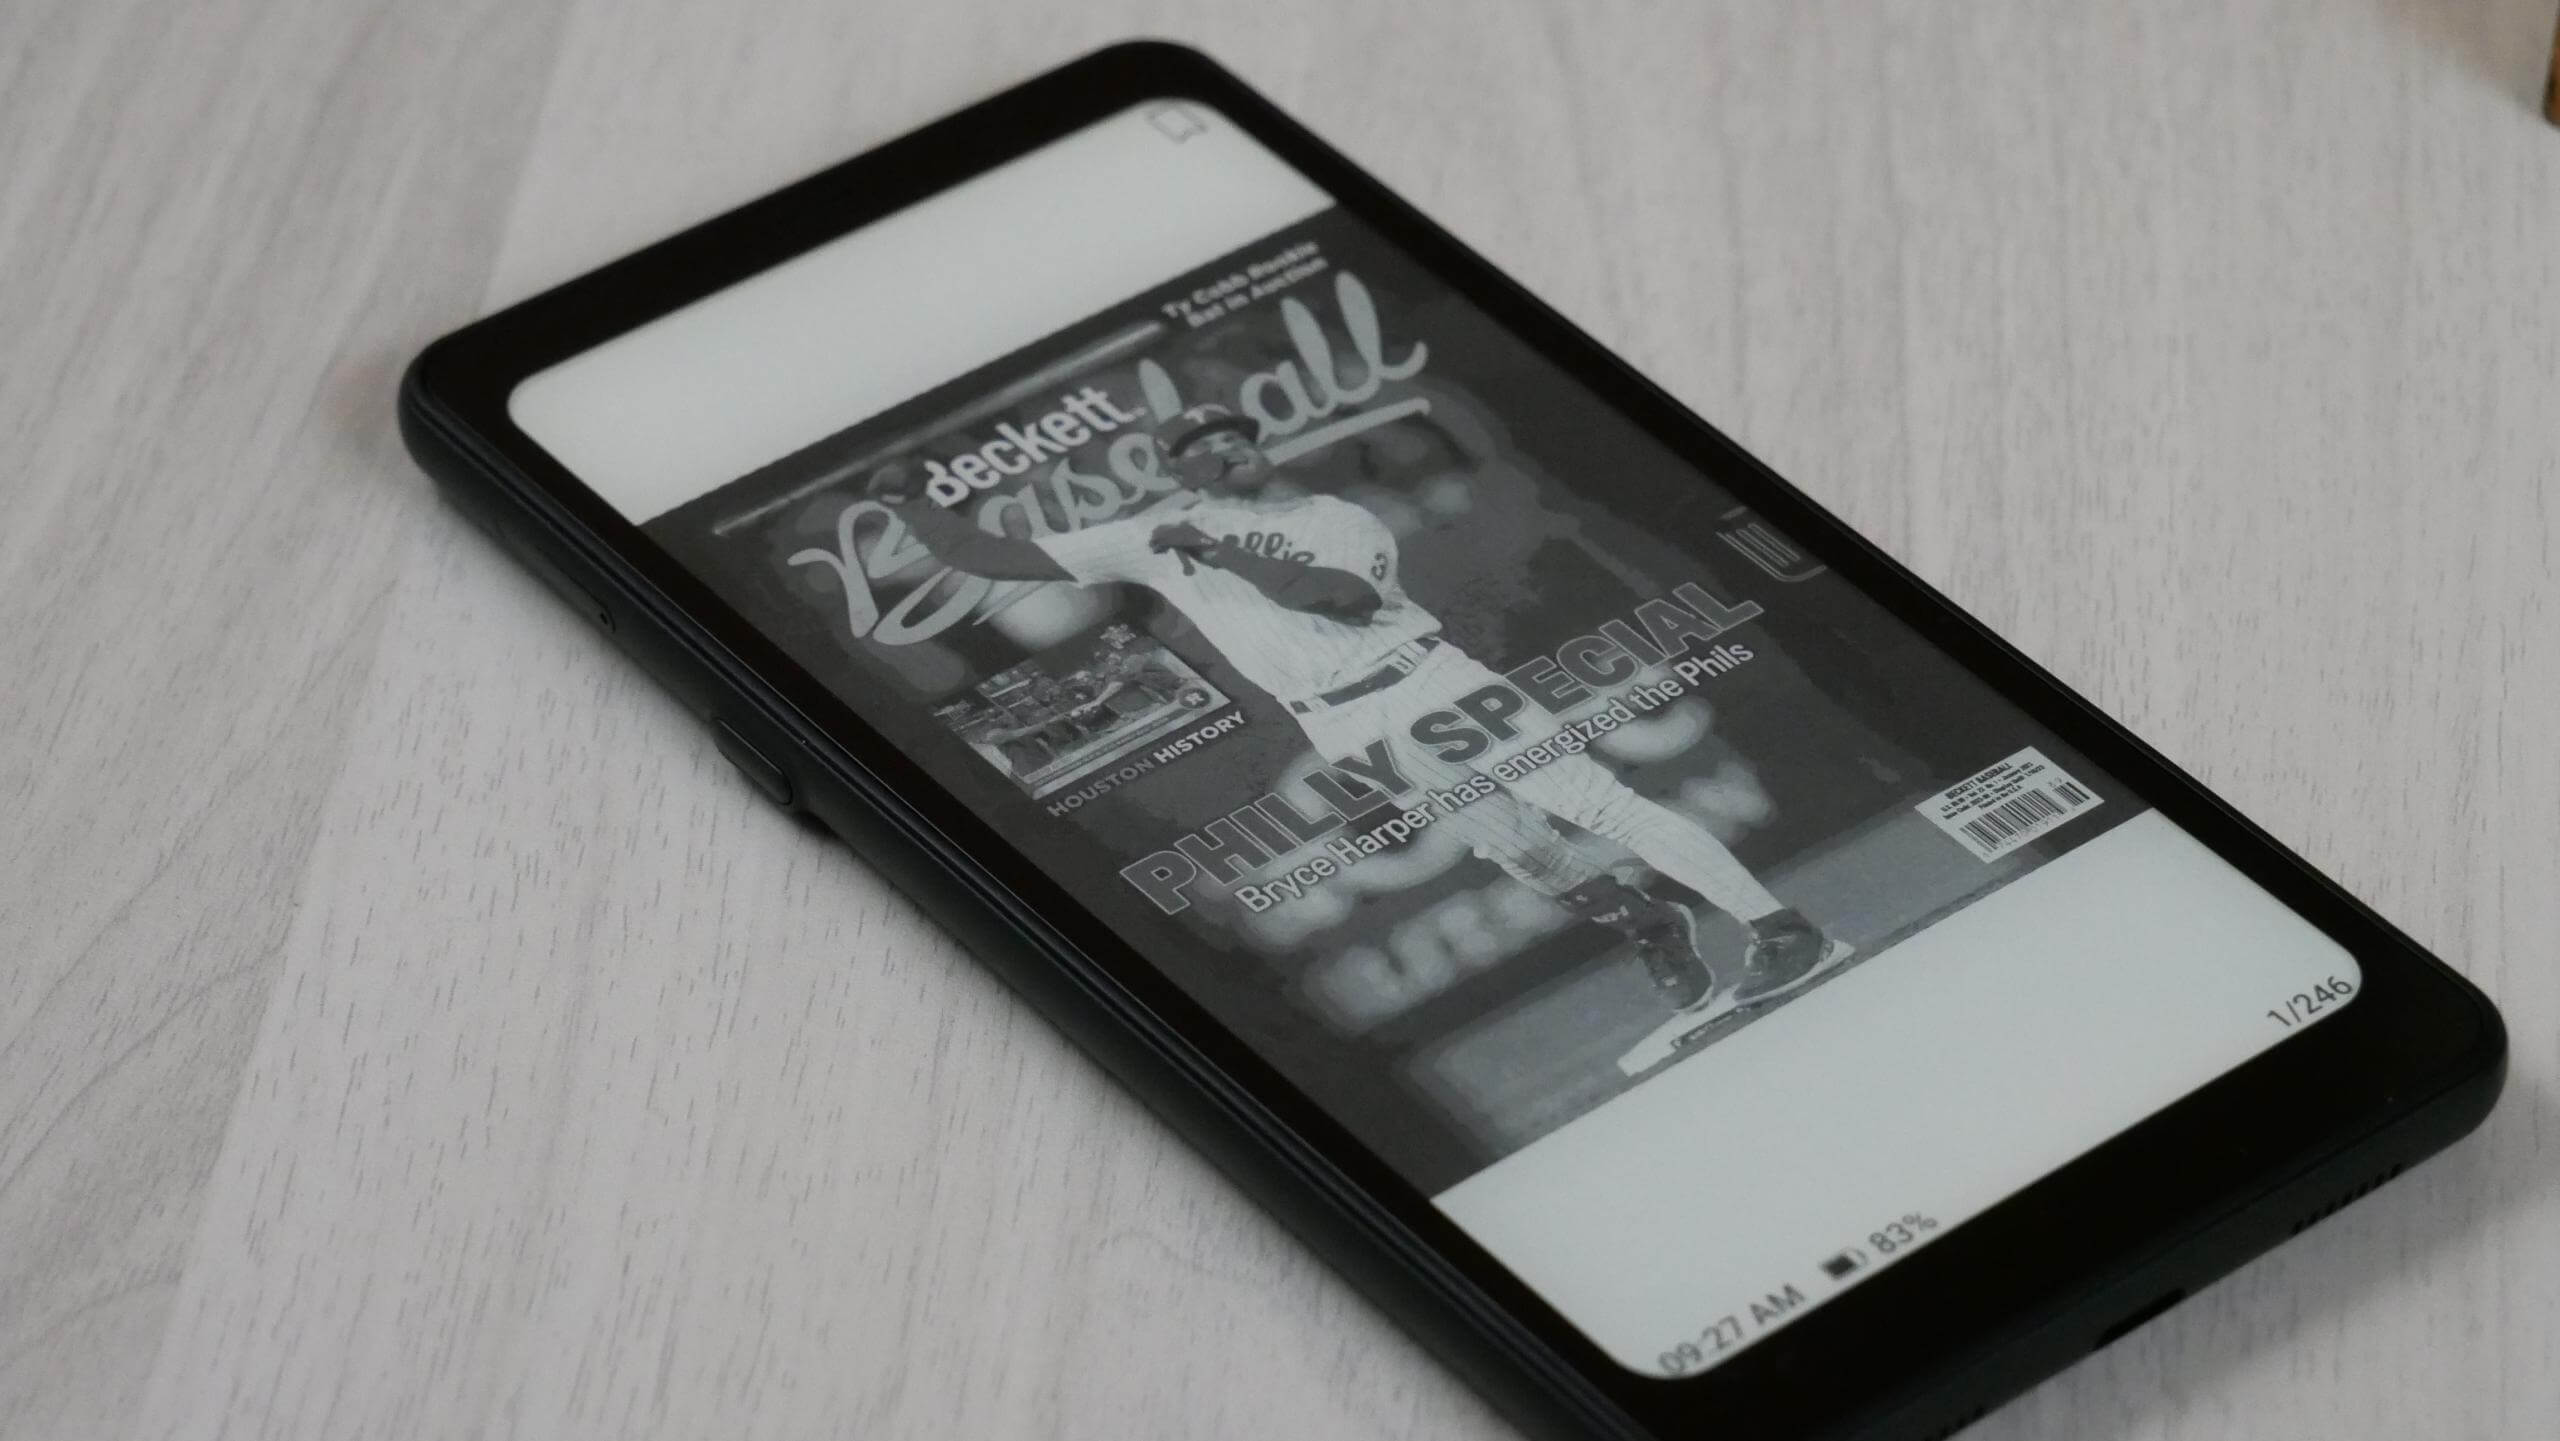 Onyx BOOX Palma review - Looks like a phone but it's a mini ereader that  fits in your pocket - The Gadgeteer